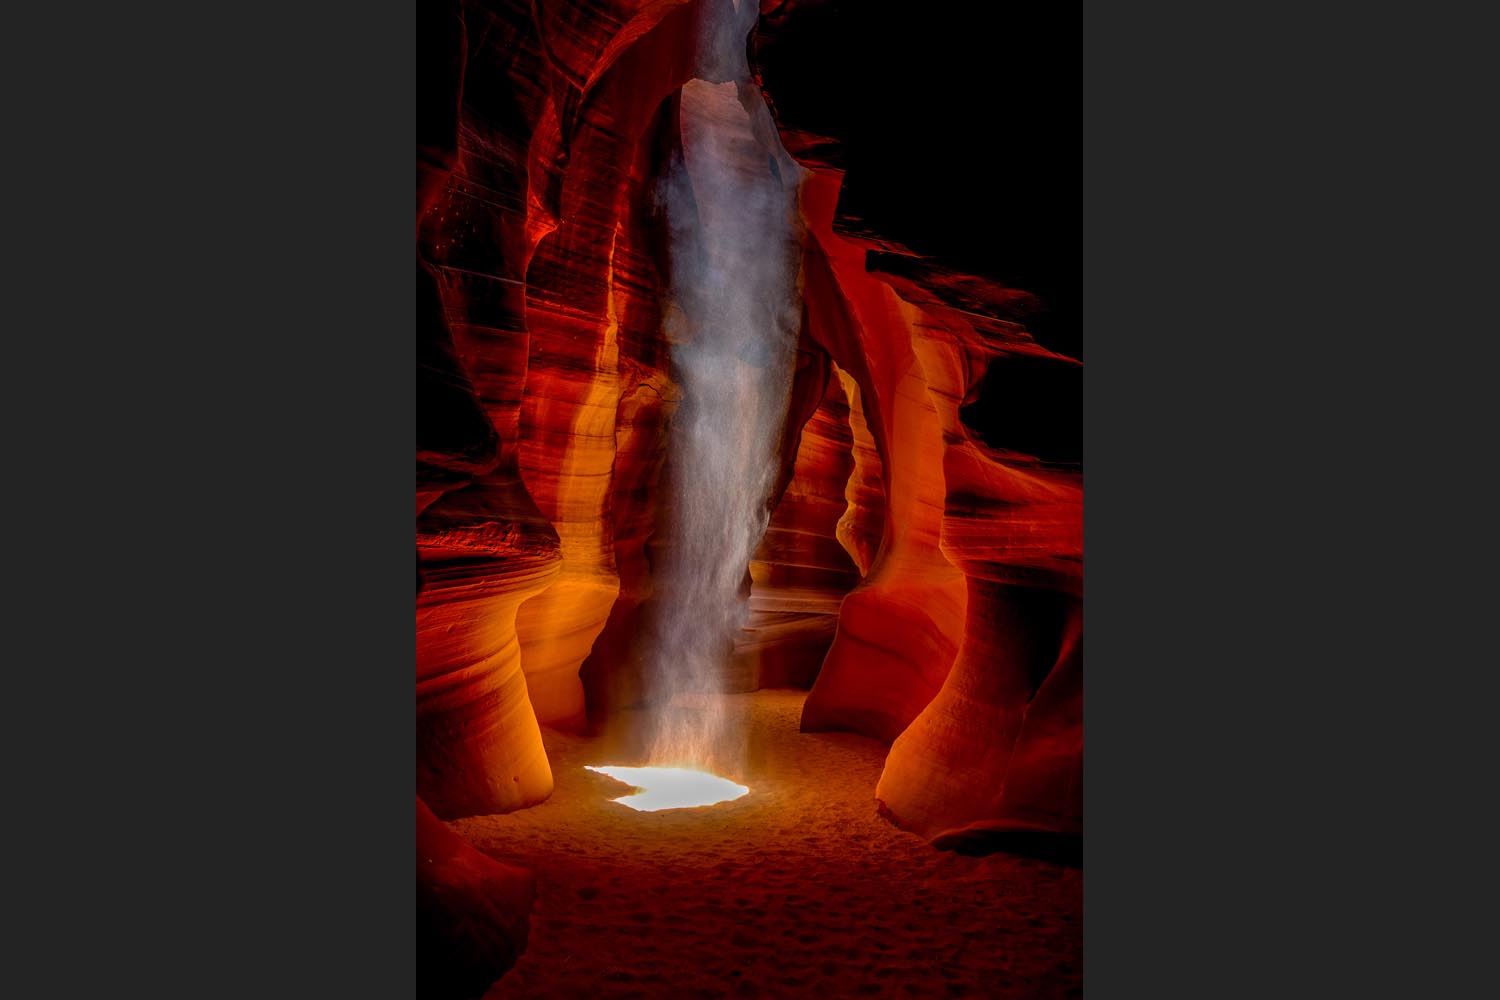 Terry Brandt: The Butterfly - Antelope Canyon, Arizona